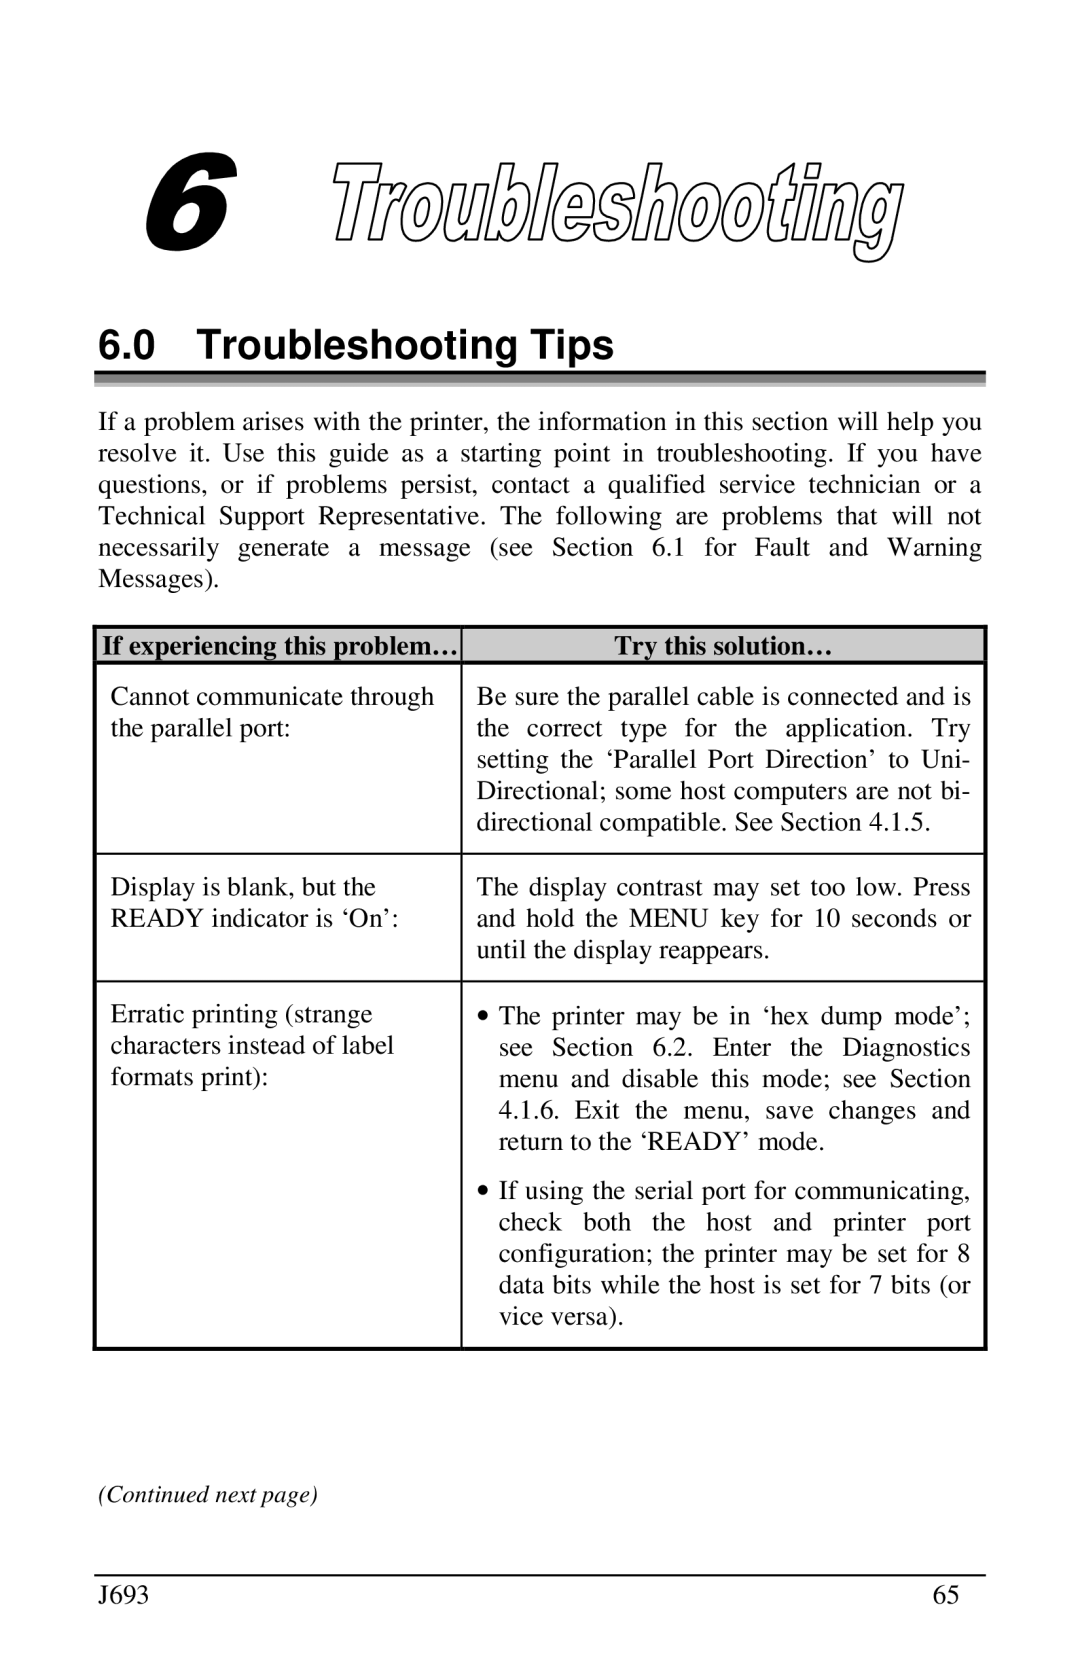 Pitney Bowes J693 manual Troubleshooting Tips, If experiencing this problem…, Try this solution… 